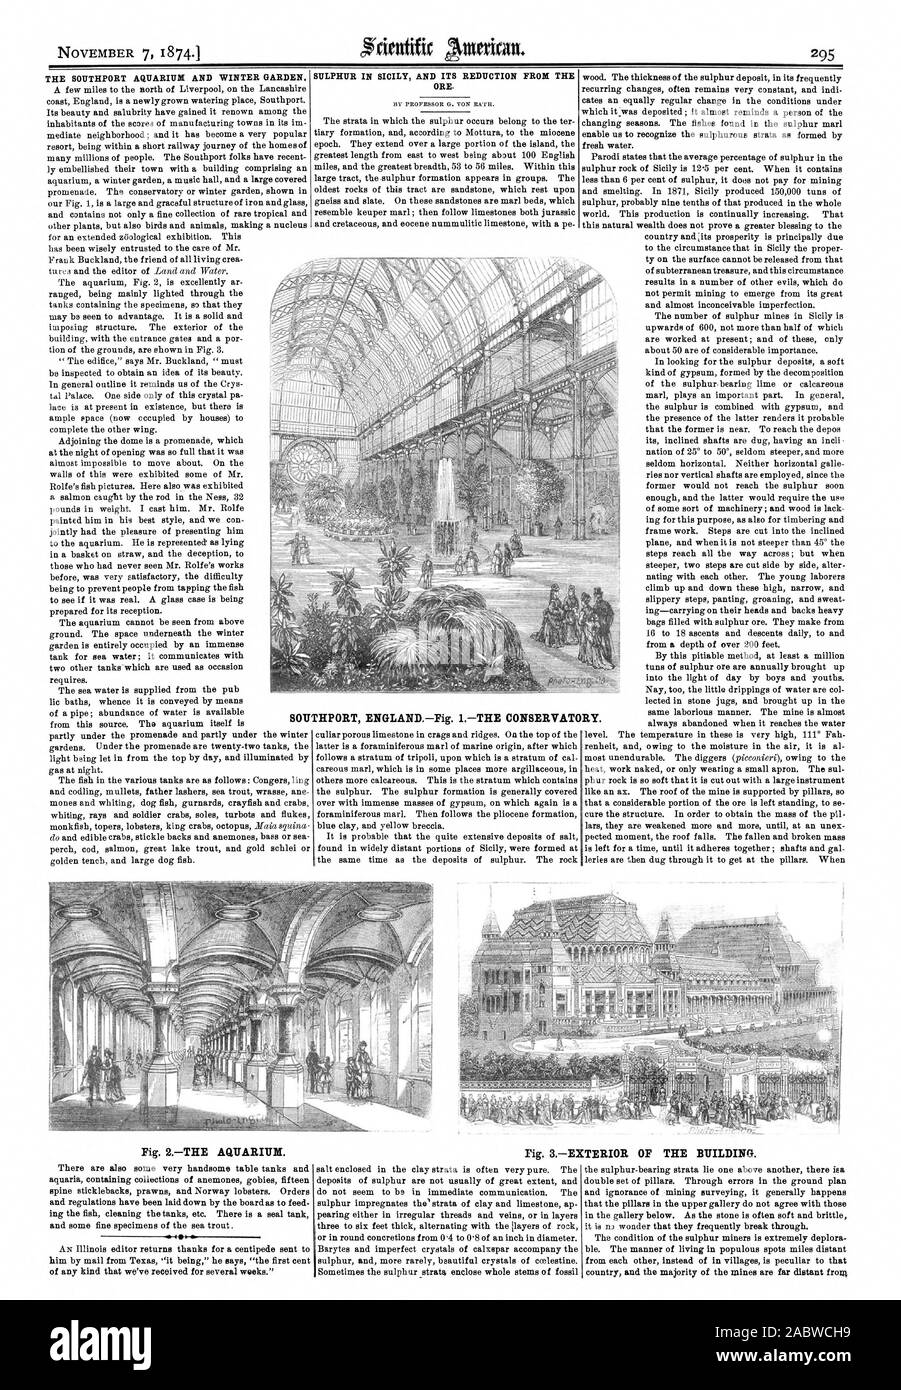 THE SOUTHPORT AQUARIUM AND WINTER GARDEN. SULPHUR IN SICILY AND ITS REDUCTION FROM THE ORE. SOUTHPORT ENGLANDFig. 1THE CONSERVATORY. Fig. 3EXTERIOR OF THE BUILDING. Fig. 2THE AQUARIUM., scientific american, 1874-11-07 Stock Photo